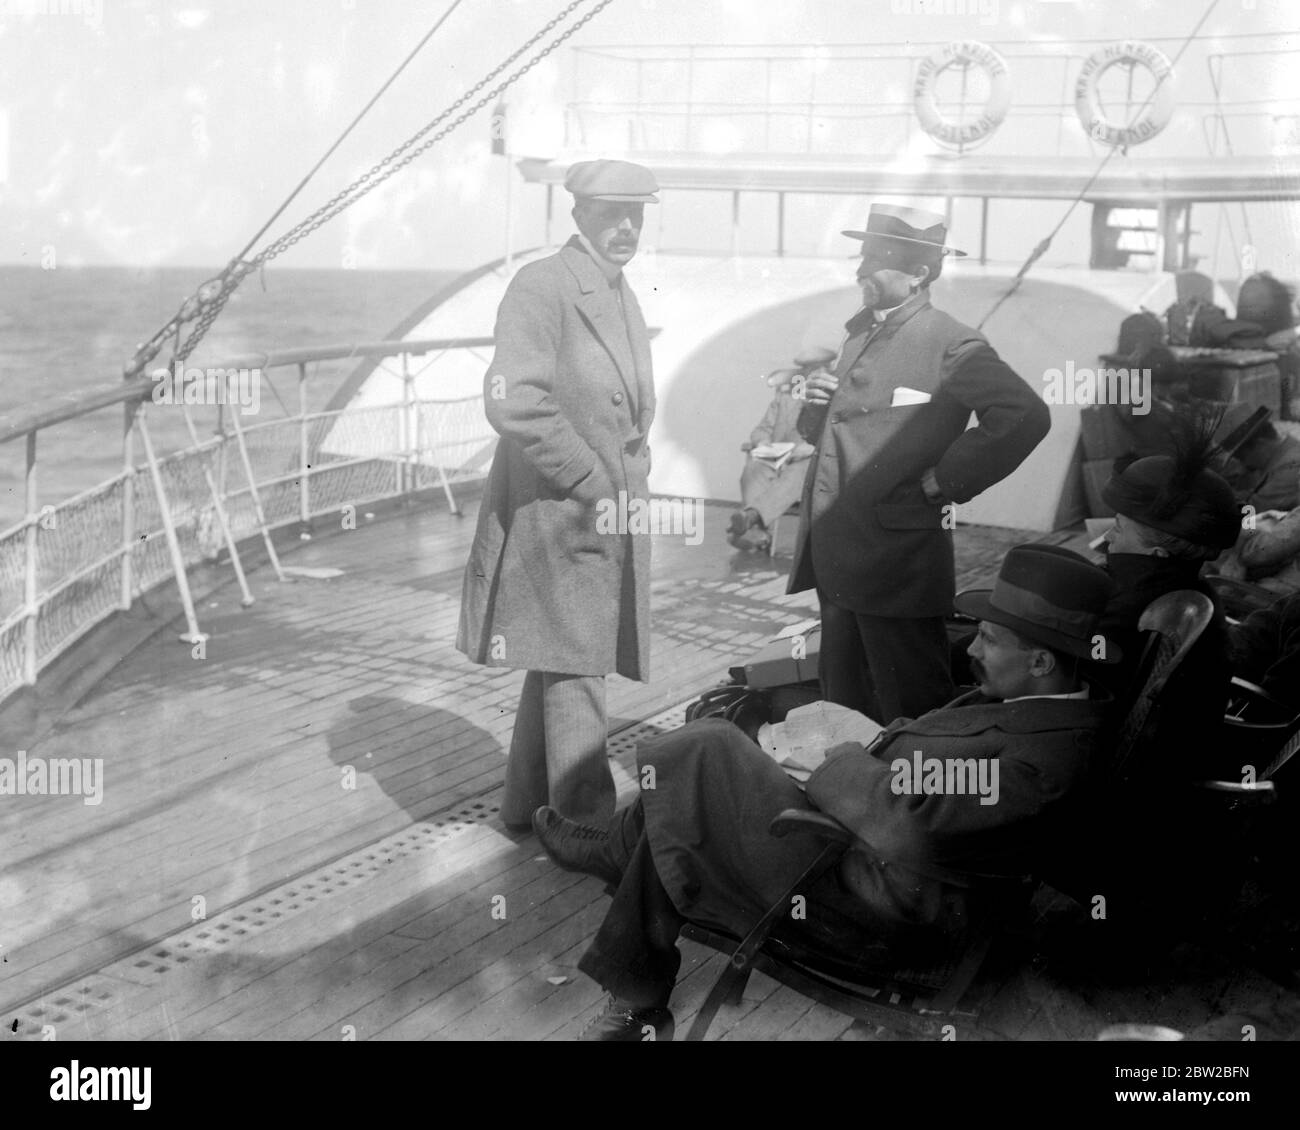 M. Dessain, Burgomaster of Malines, on his way to England to consult the Belgian minister and the British government regarding the German atrocities in Malines. 1914-1918 Stock Photo